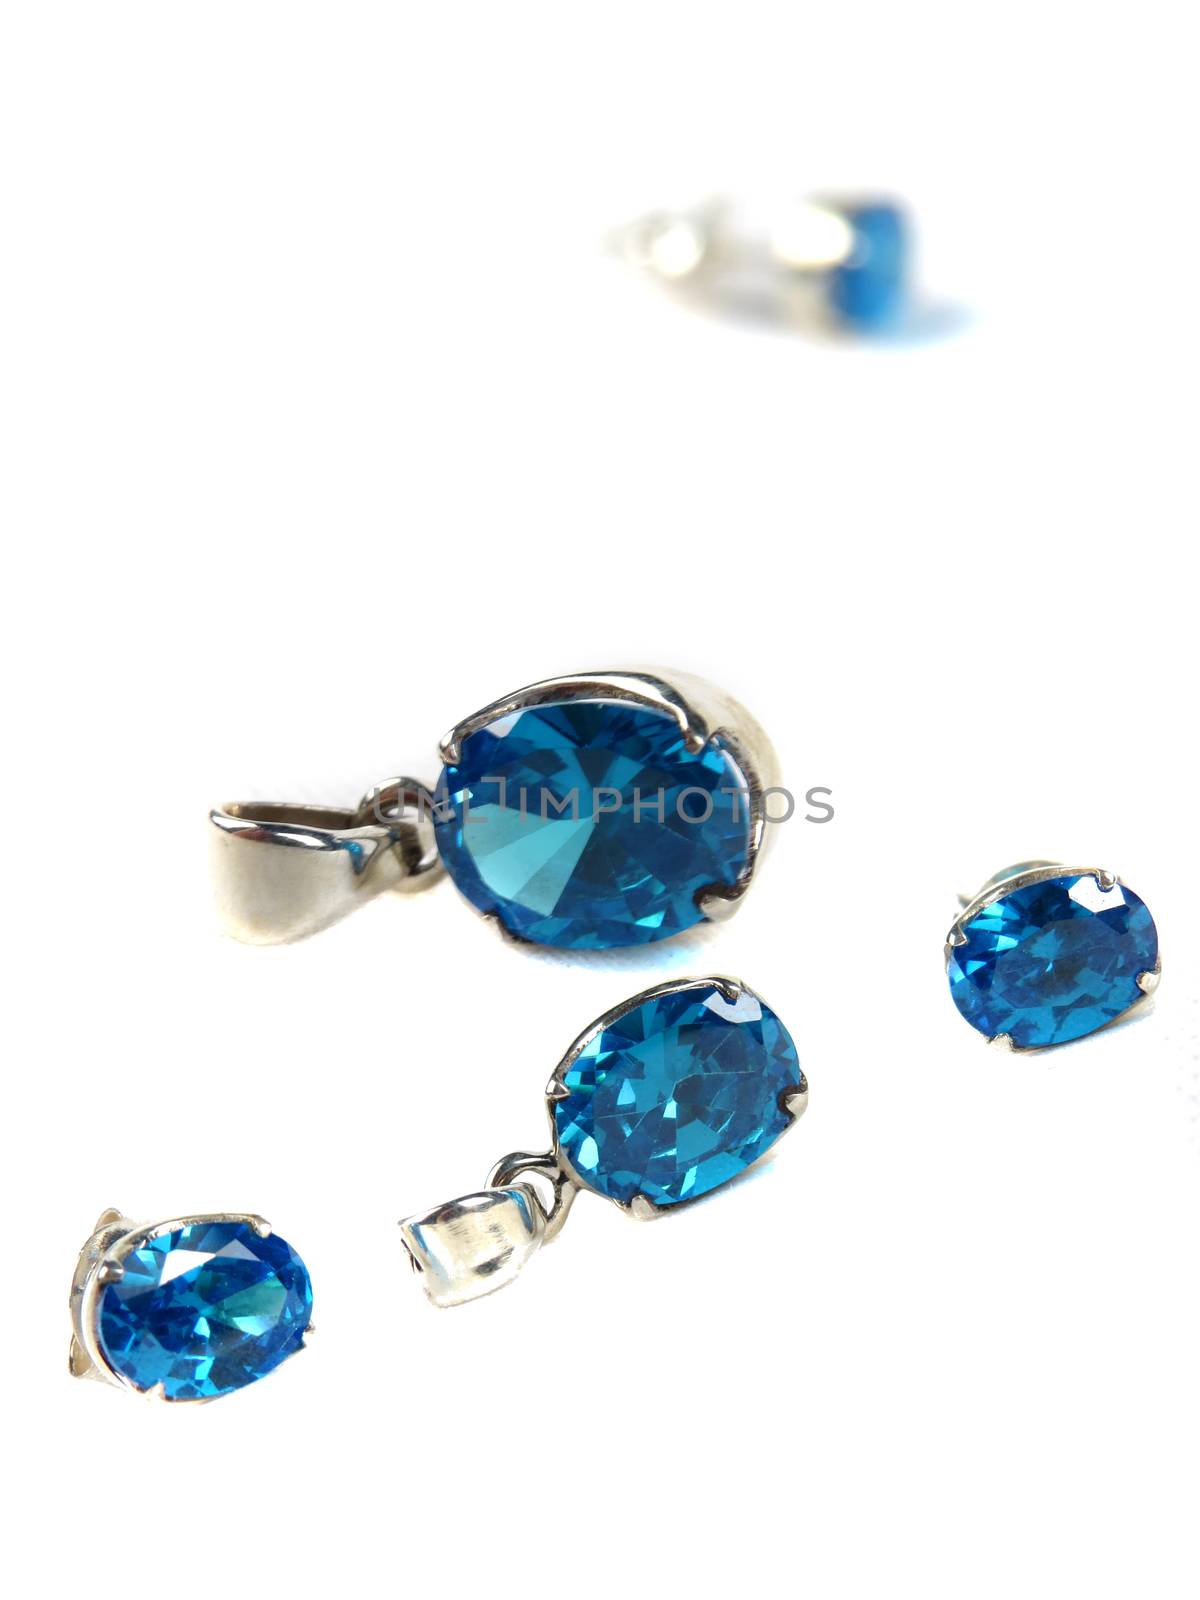 A set of silver jewelery with blue gemstones consisting of pendants and earrings                               